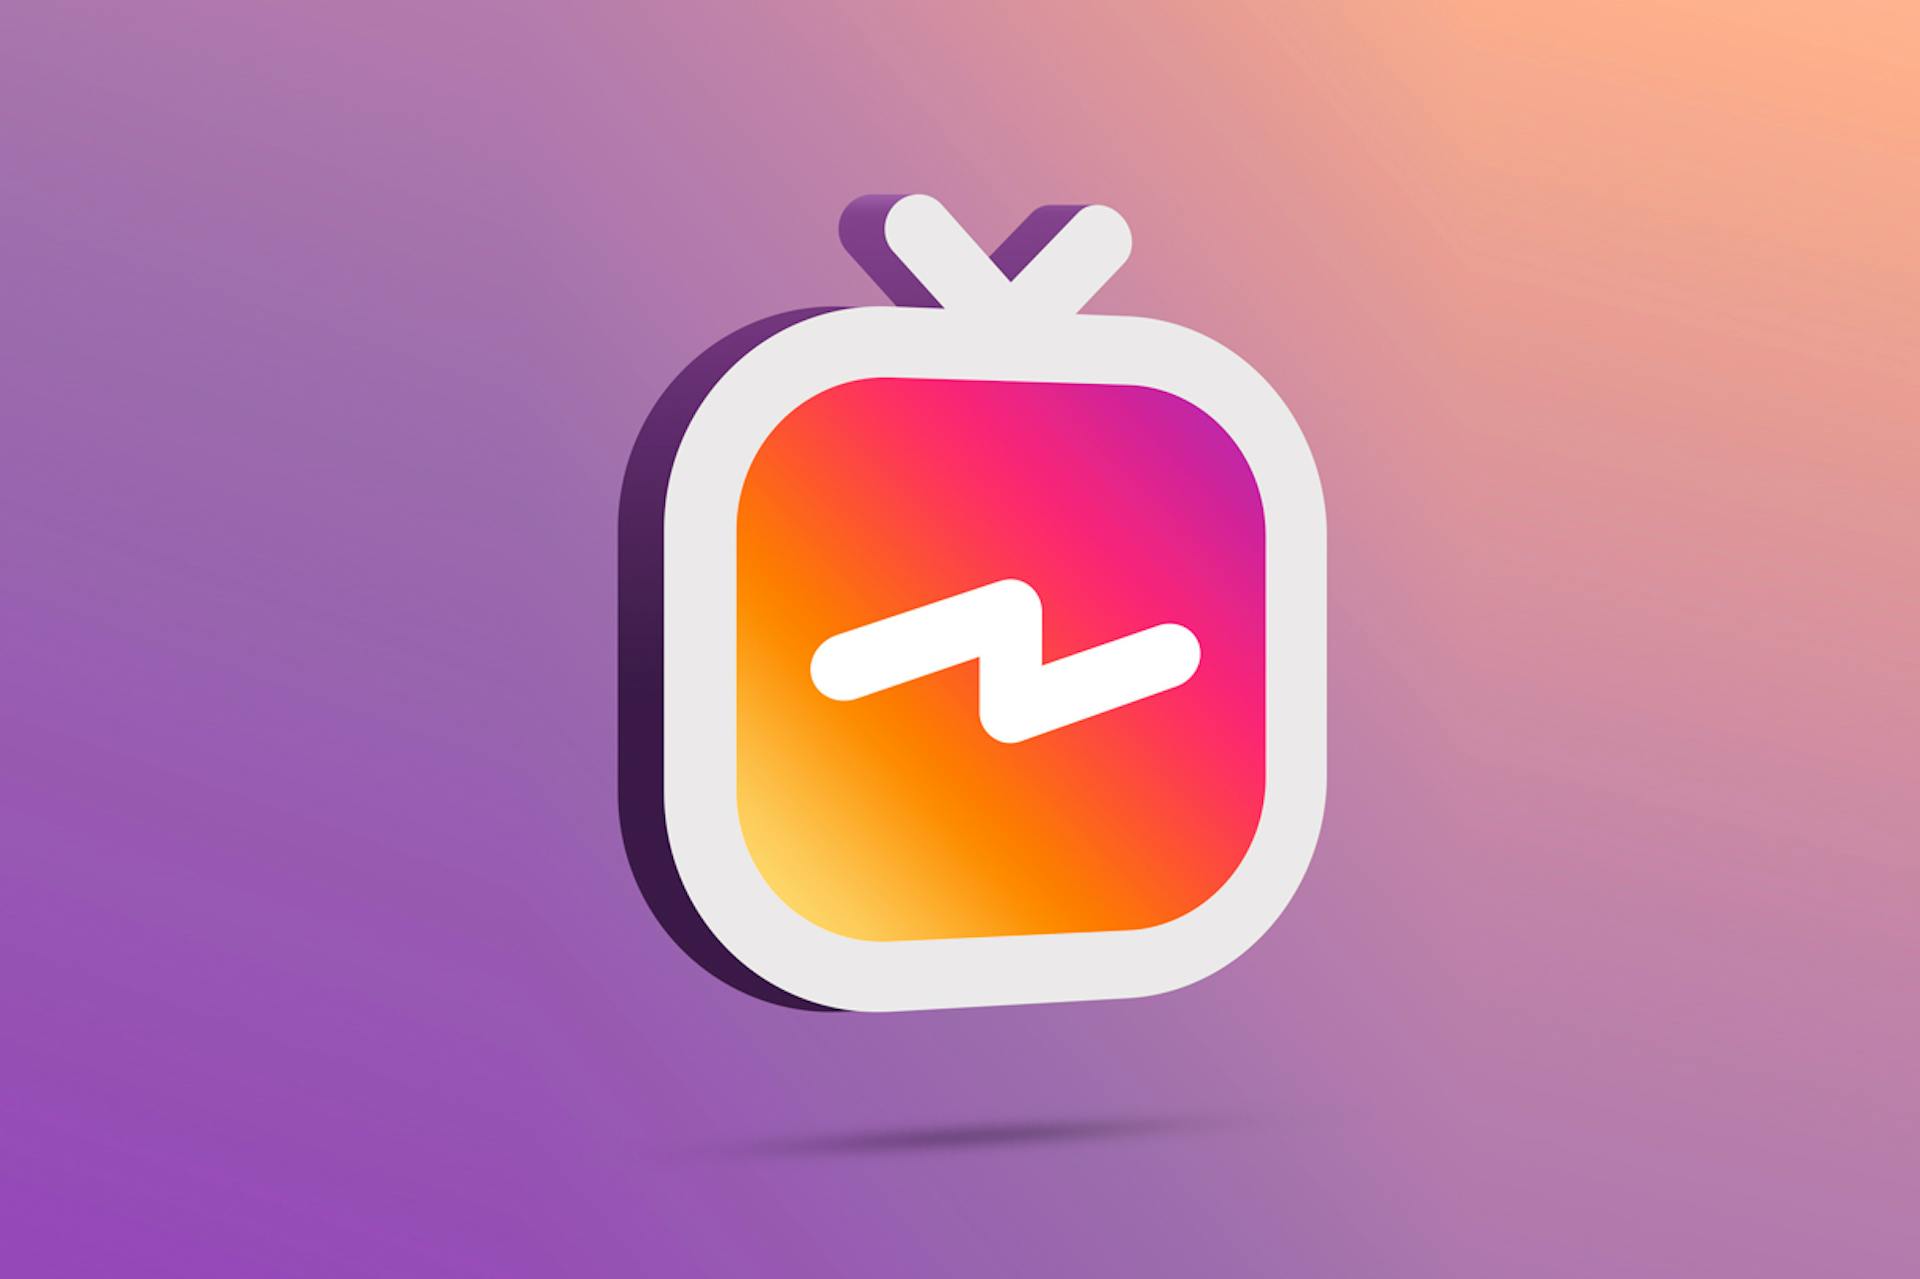 An illustrated image of the IGTV logo against a gradient background.